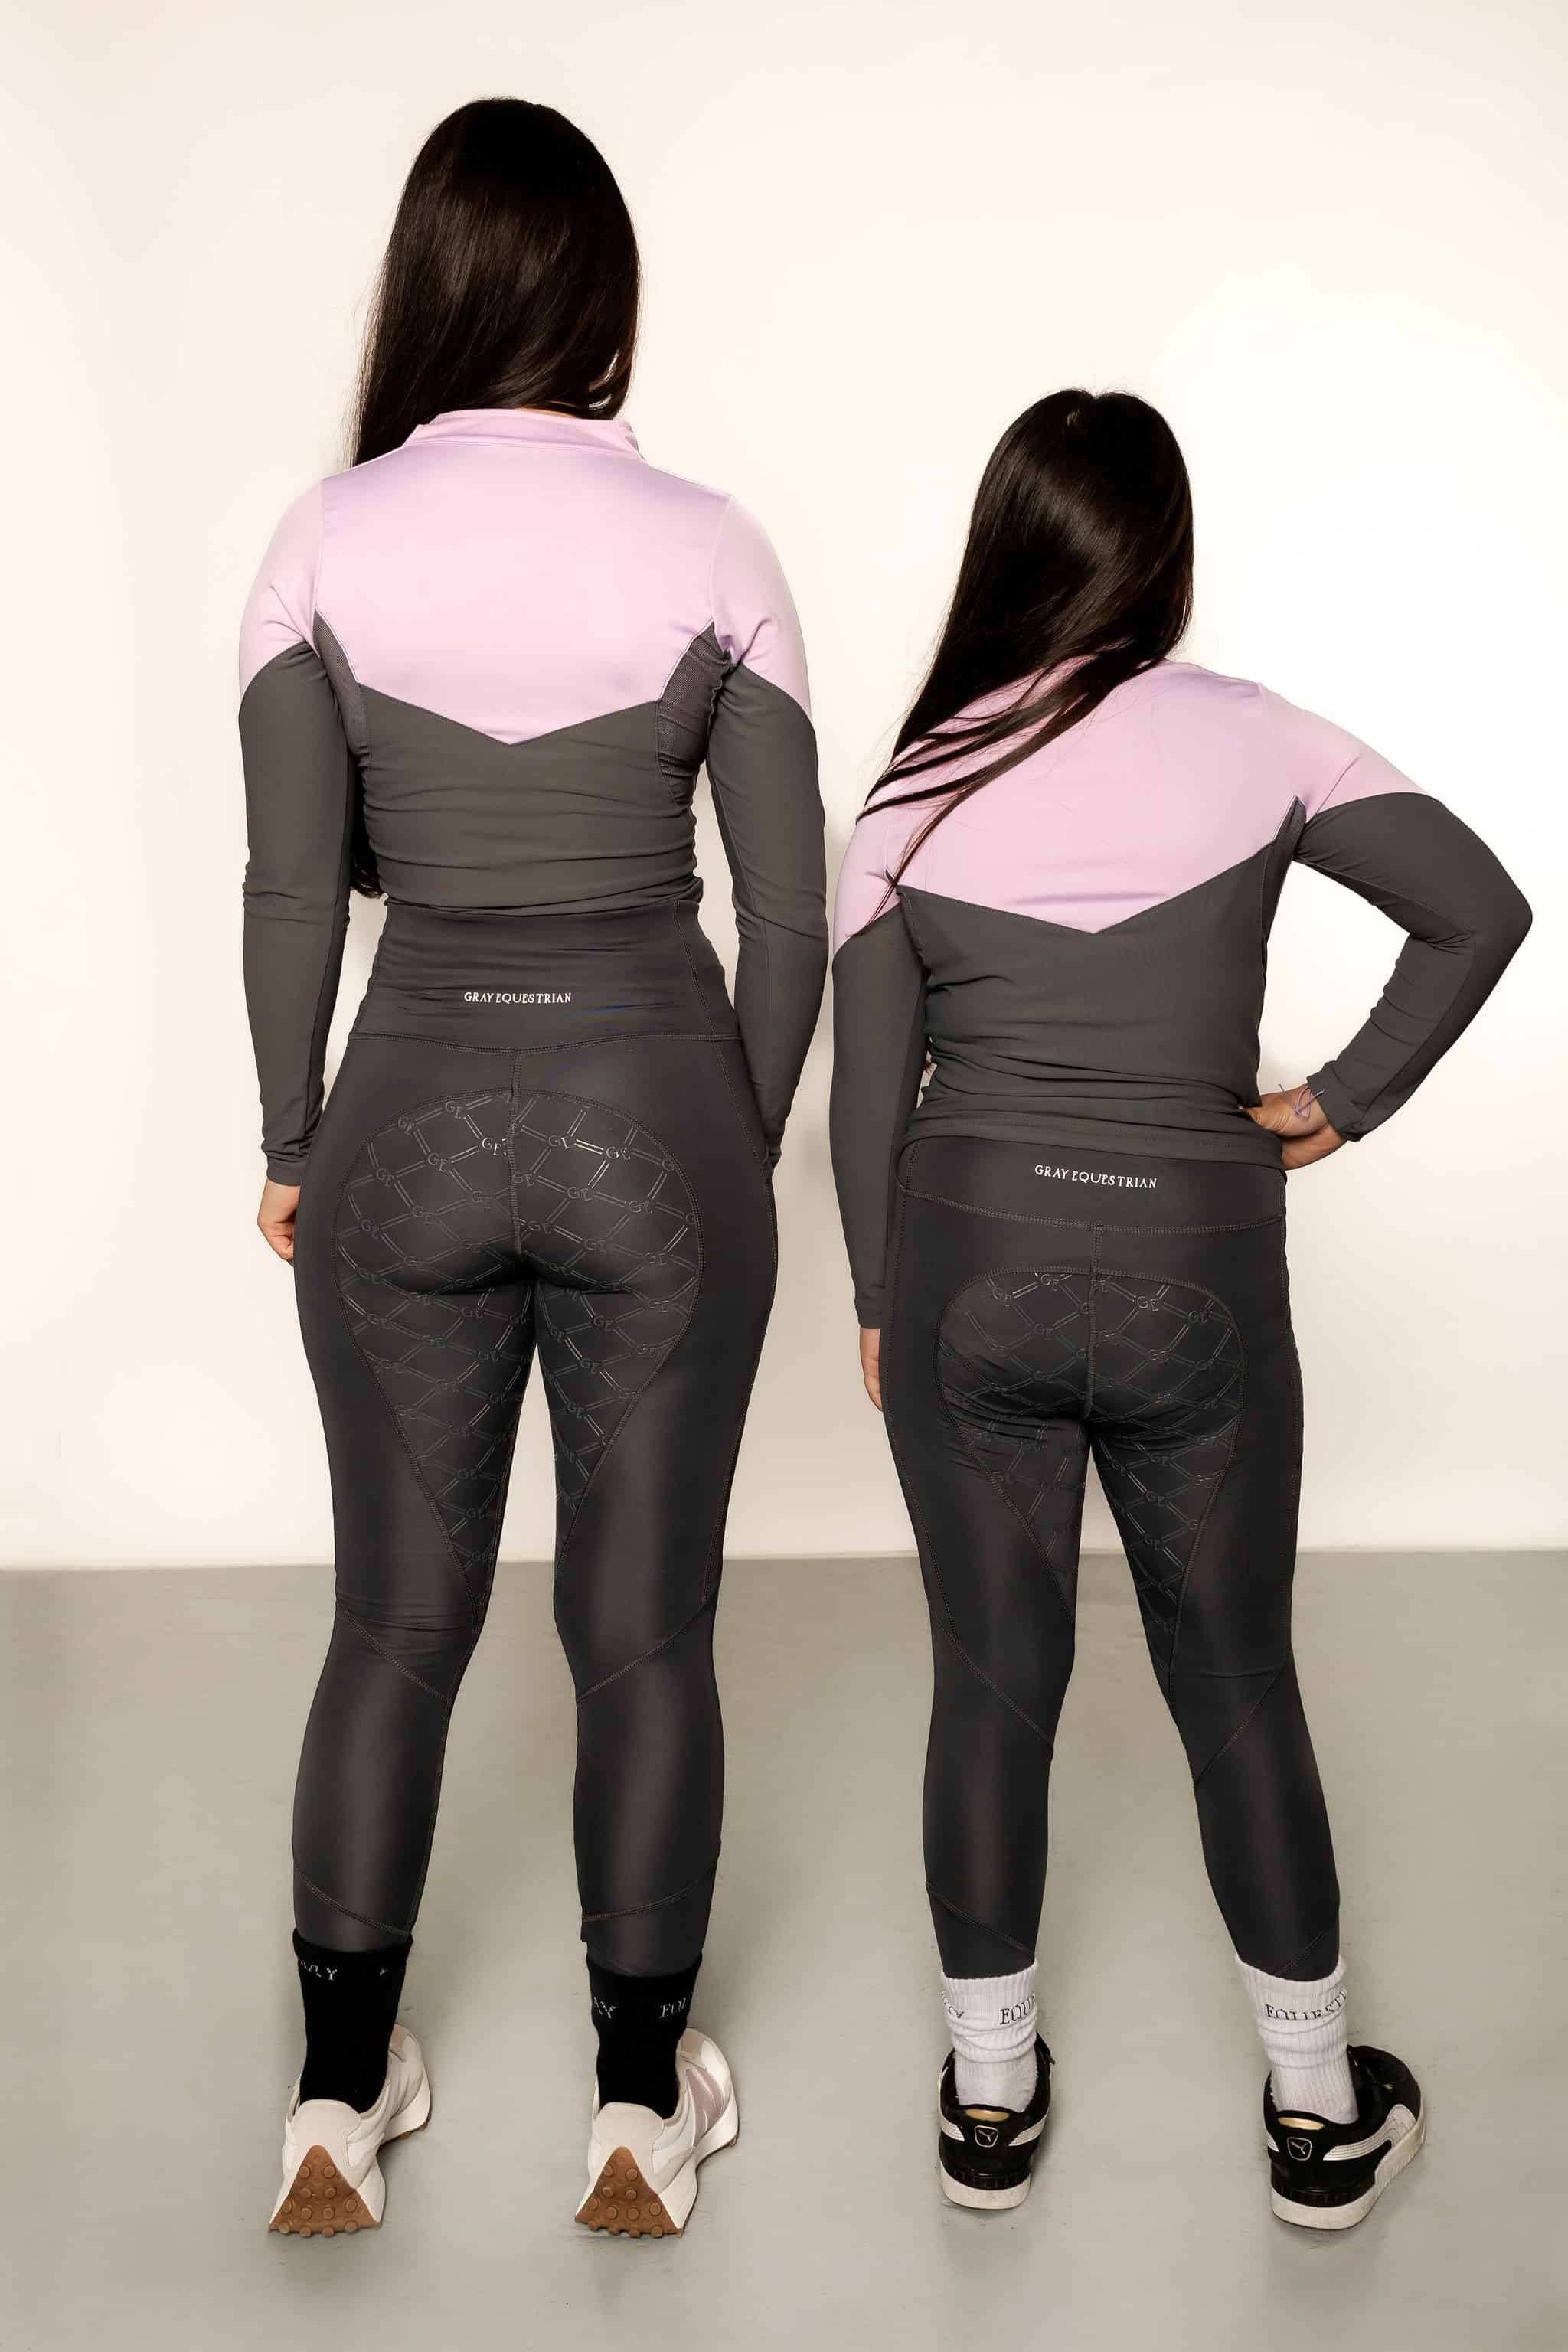 Two models, a young rider and an adult rider wearing the lilac and grey base layer top and grey leggings from behind 